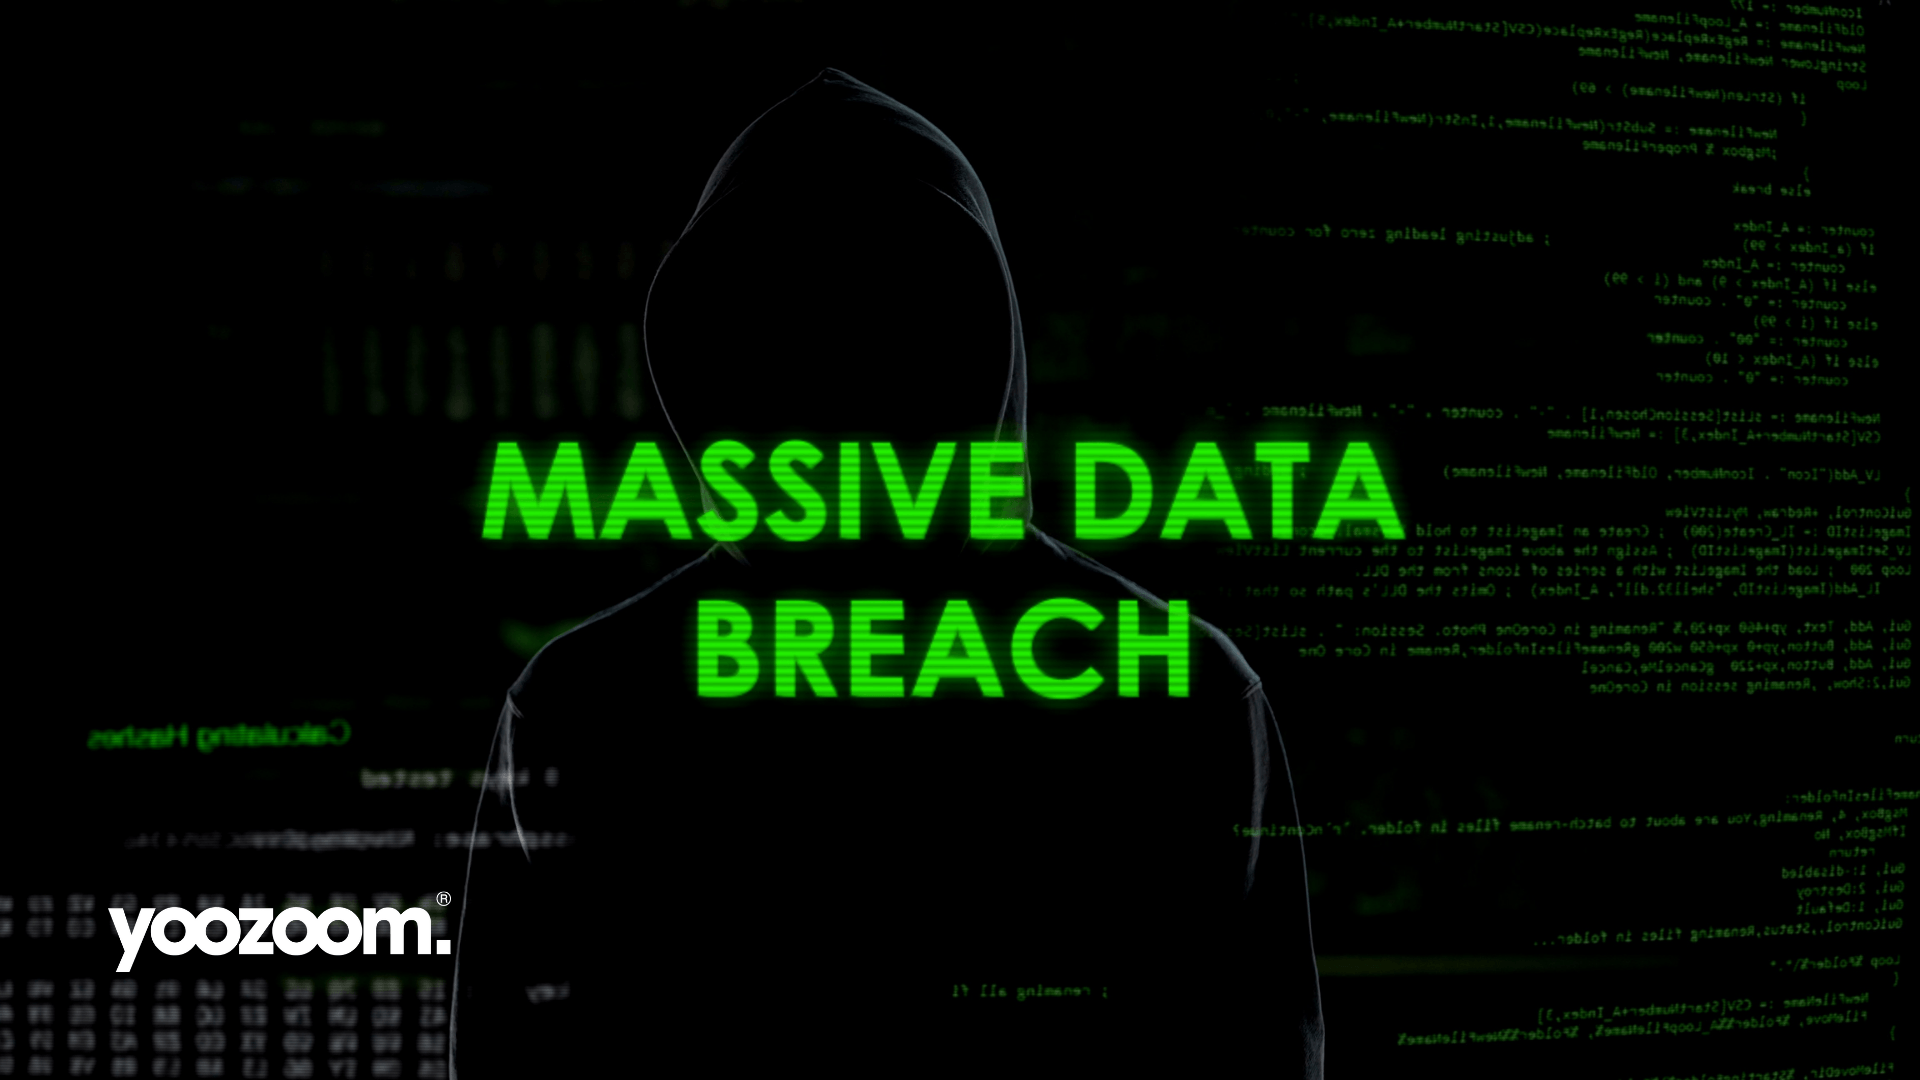 Worried about a data breach? You should be. Here are 11 tips to help stop costly breaches – or take damage-limitation measures if the worst happens.